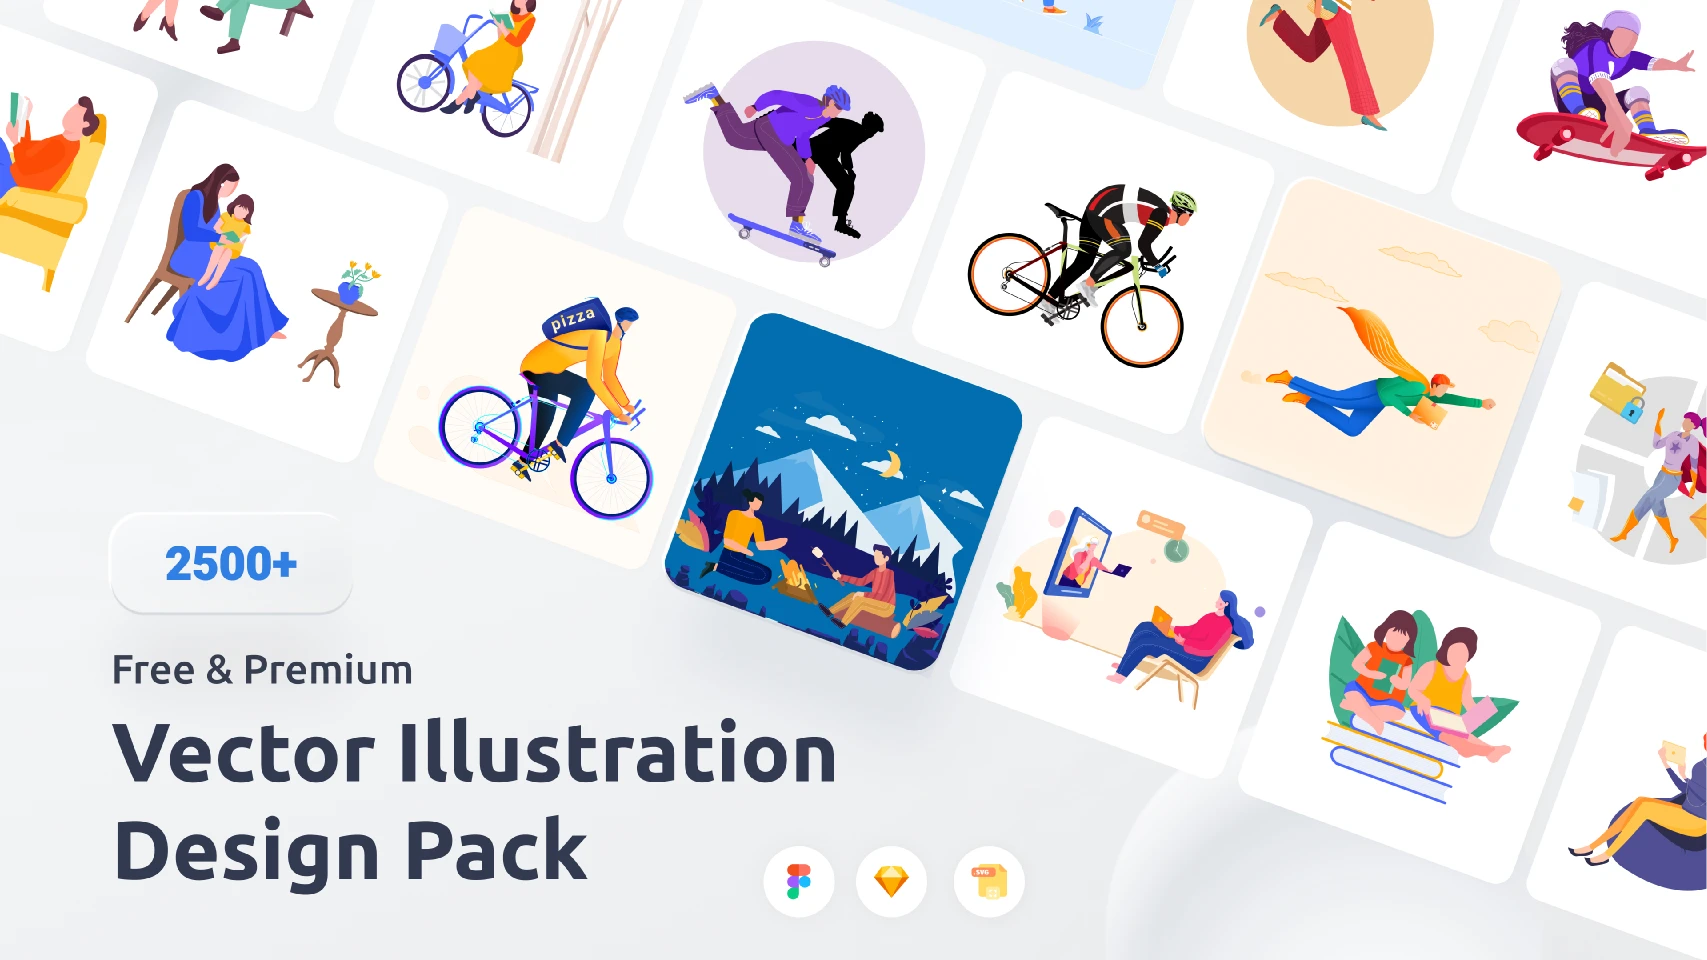 Vector Illustration Design Pack for Figma and Adobe XD